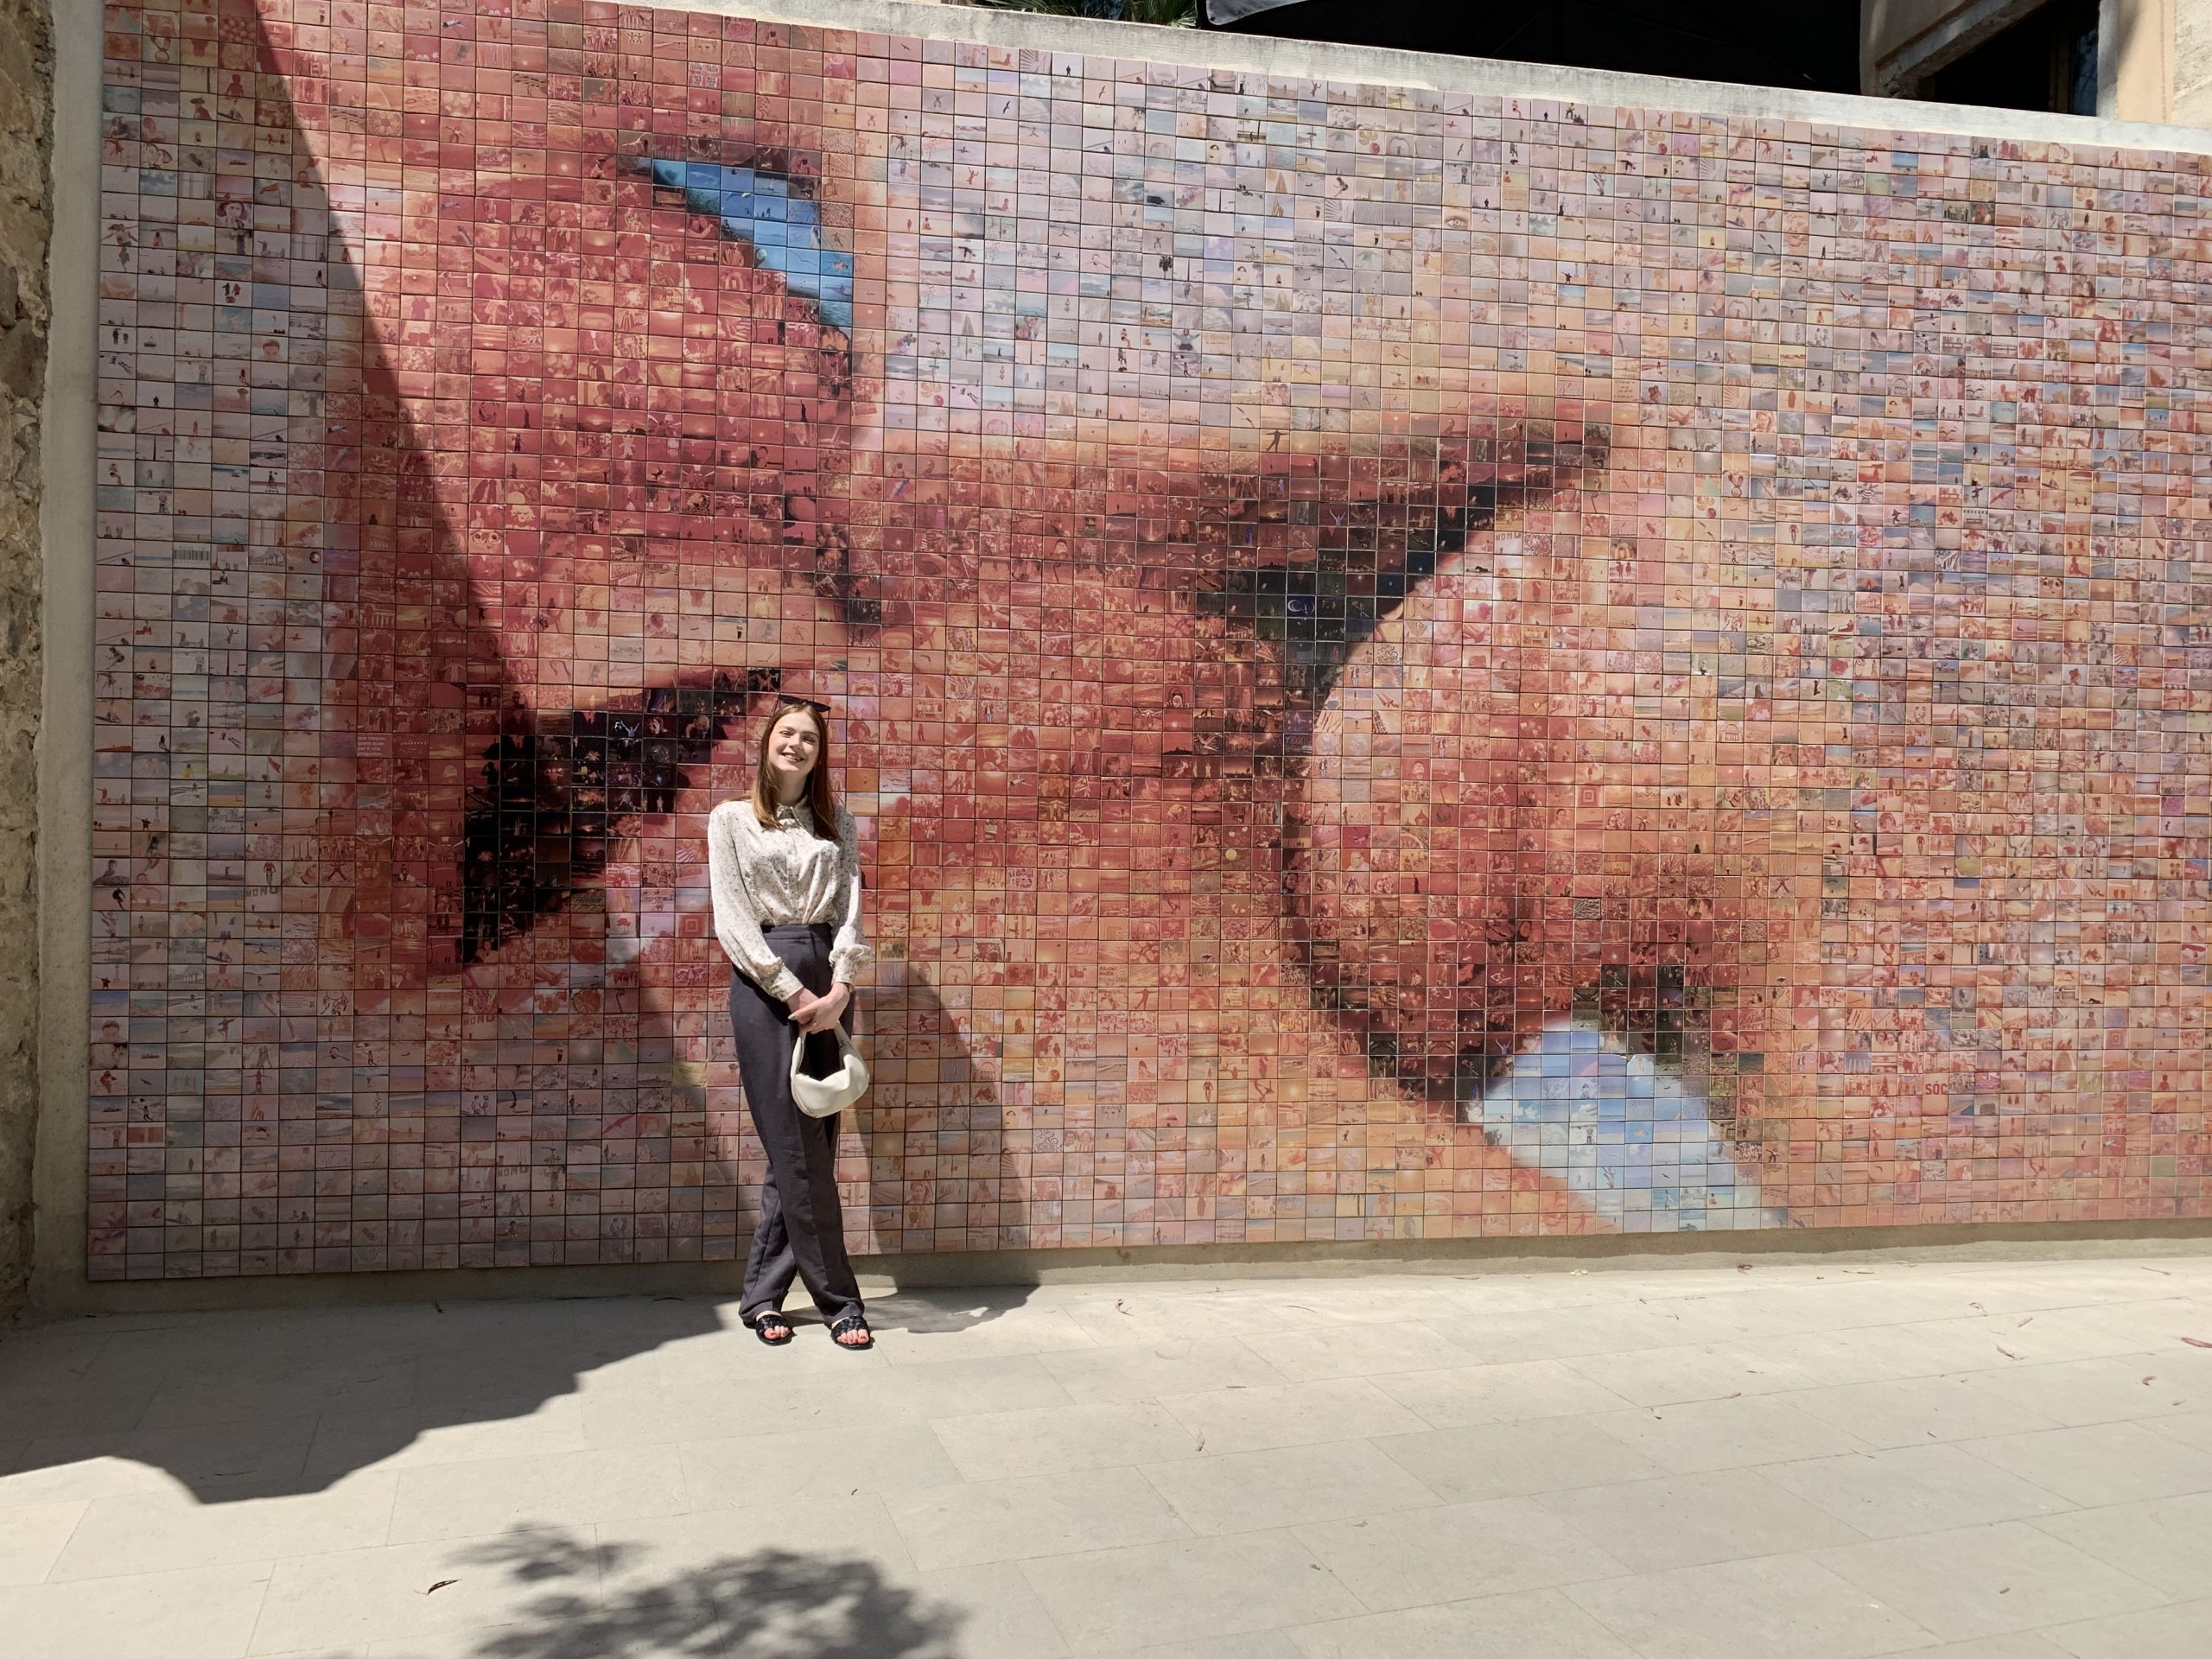 romantic things to do in Barcelona instagram spots the kiss mural souvenirs from barcelona